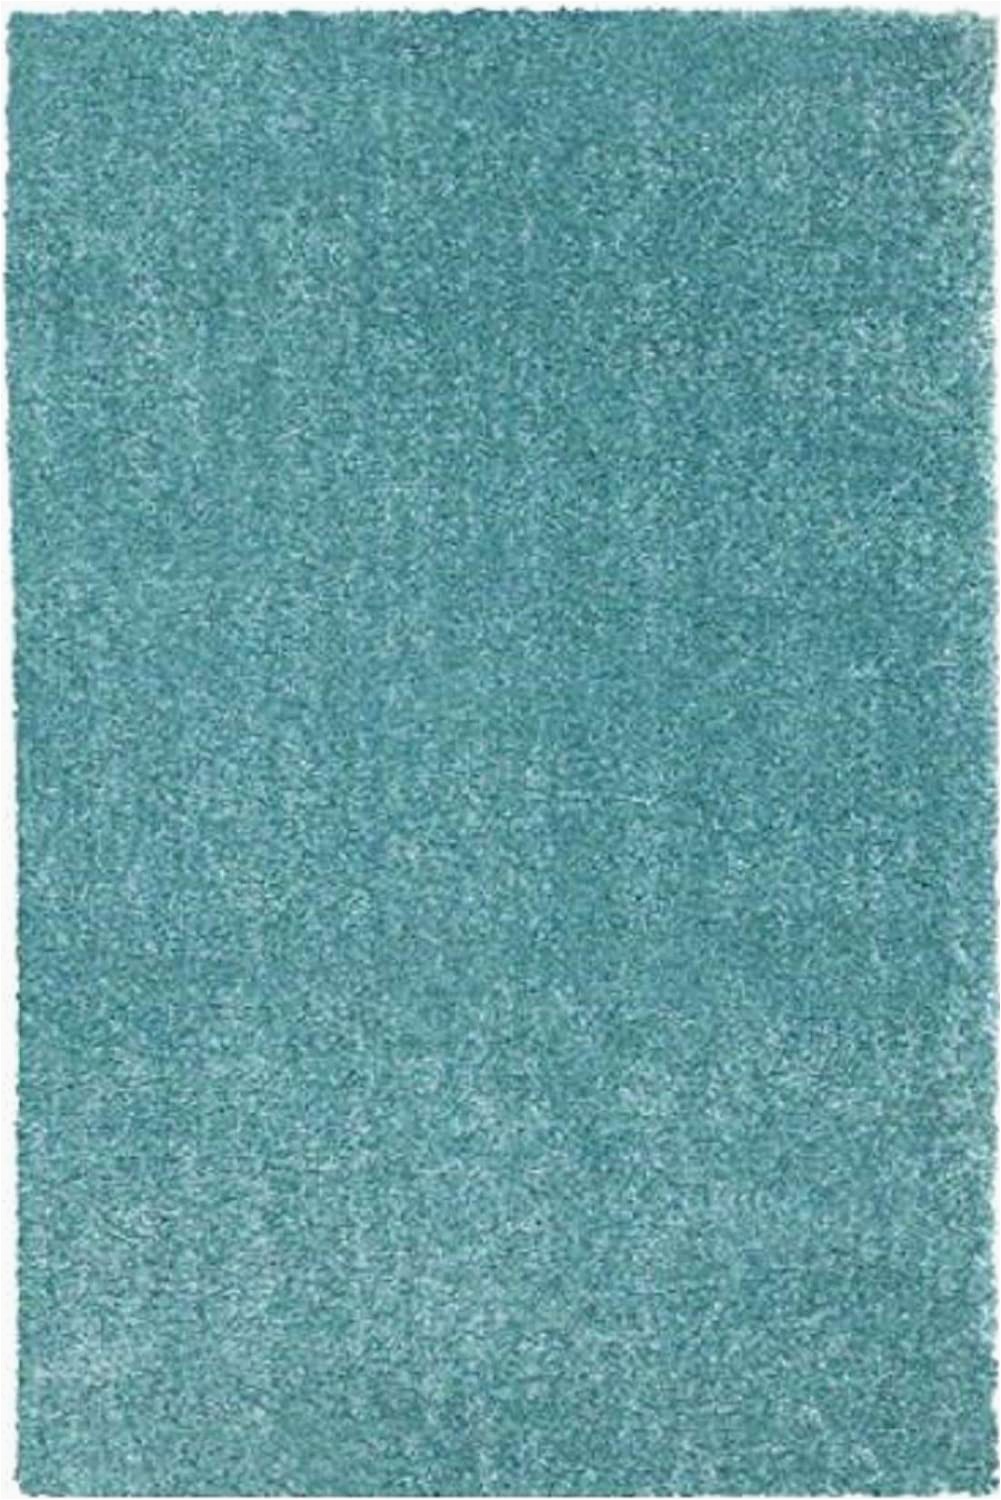 Ikea area Rugs 4 X 6 Ikea Langsted Blue Turquoise Low Pile area Rug 4 4" X 6 5